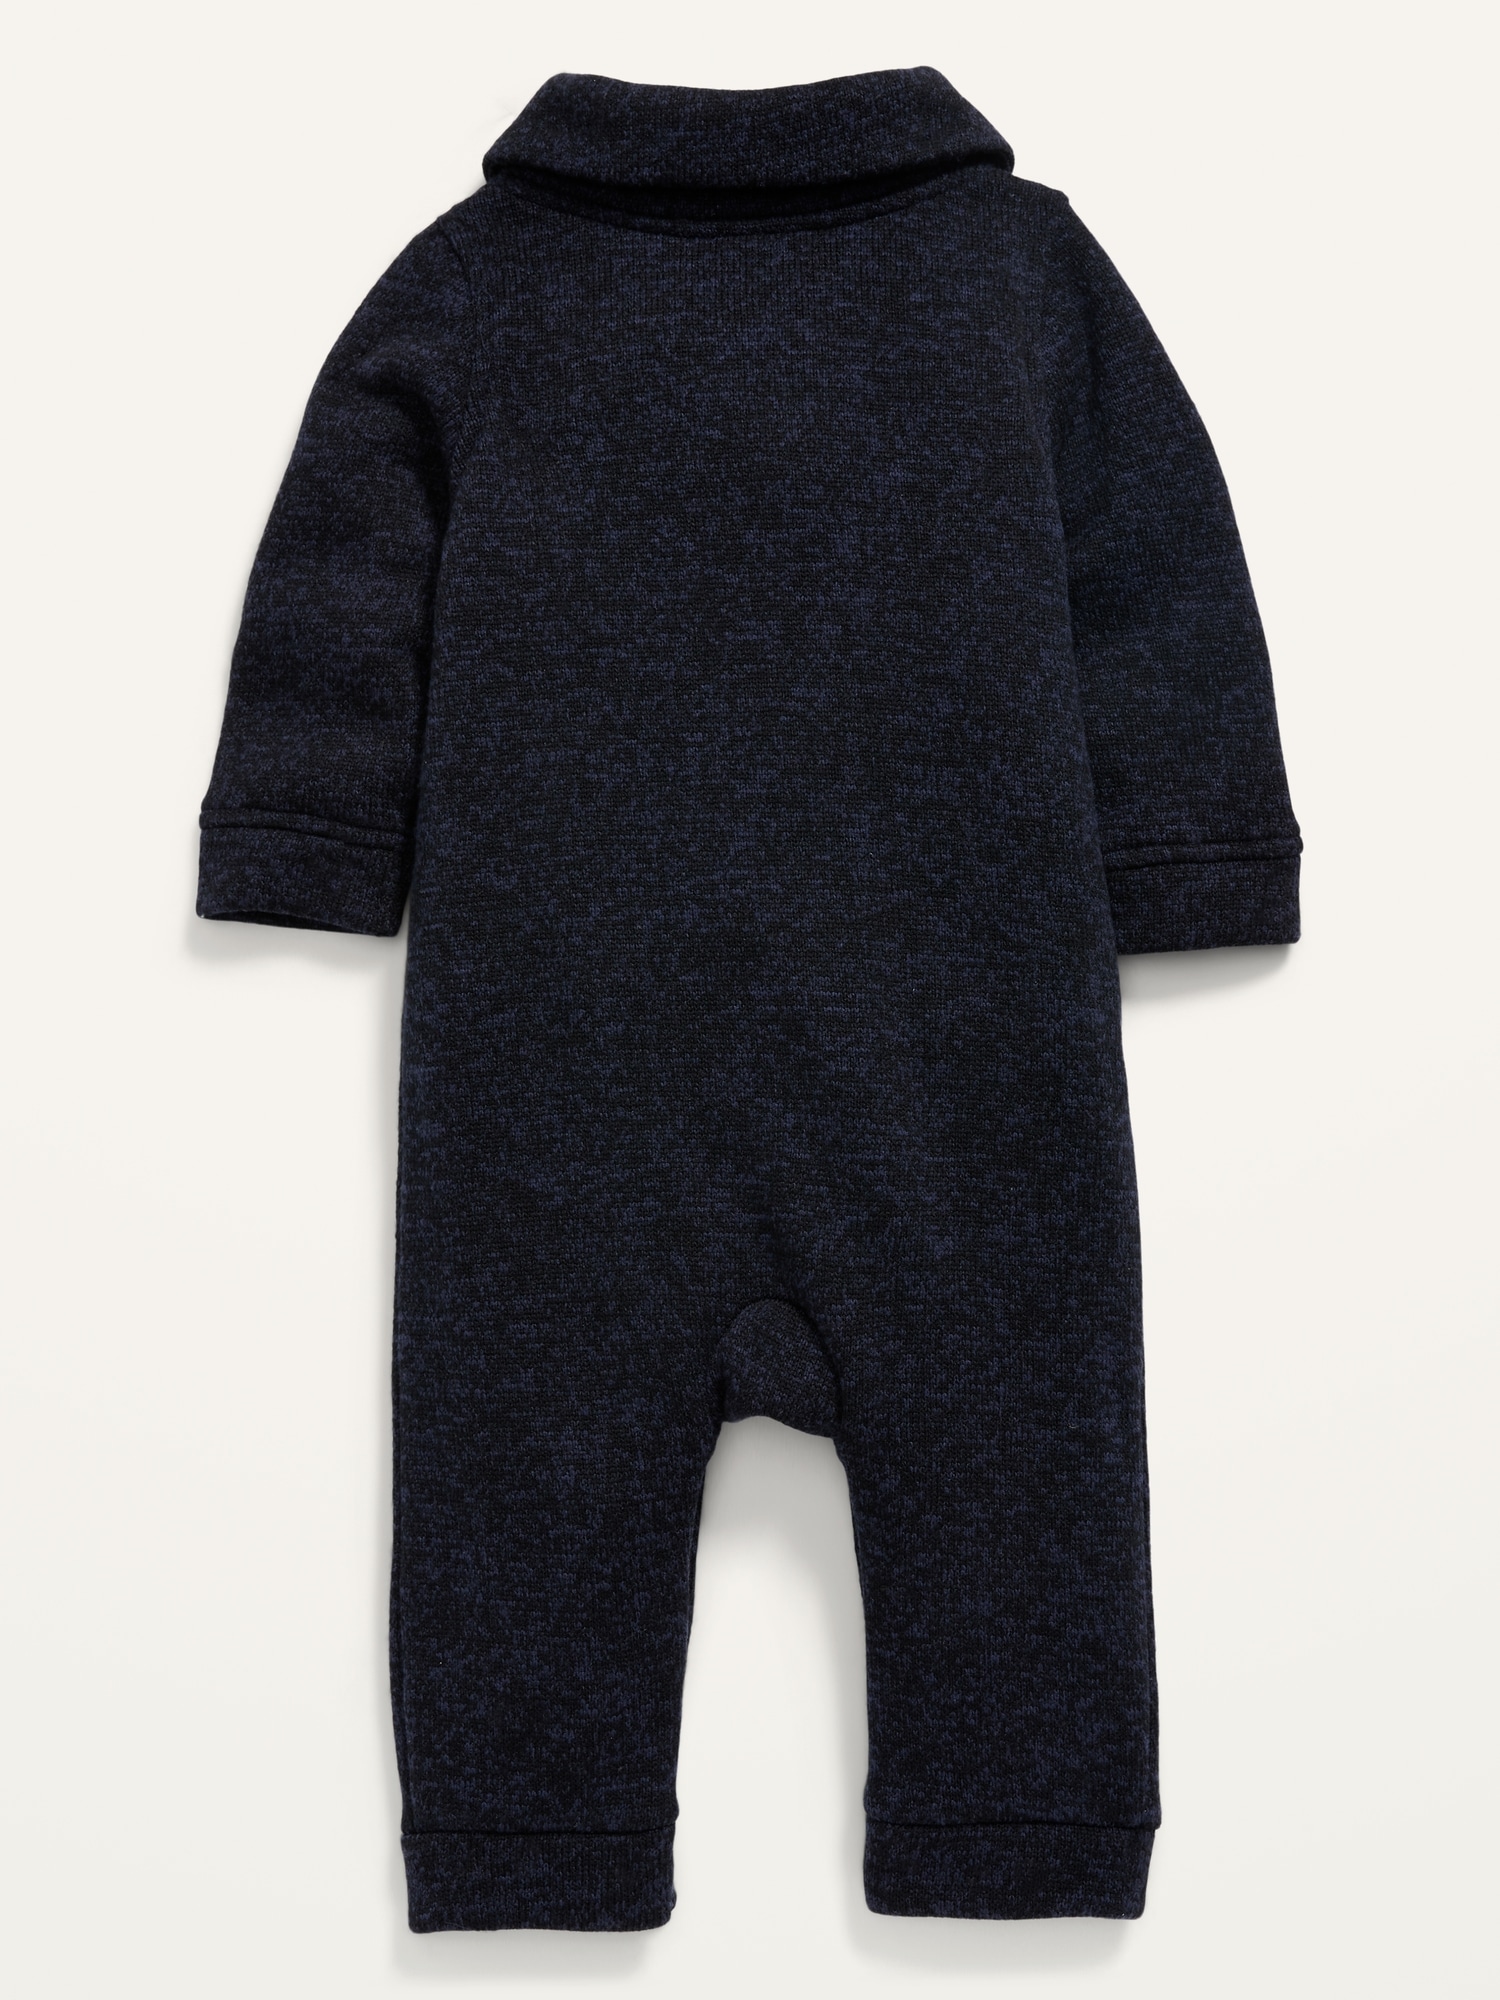 Unisex Shawl-Collar Sweater-Knit One-Piece for Baby | Old Navy